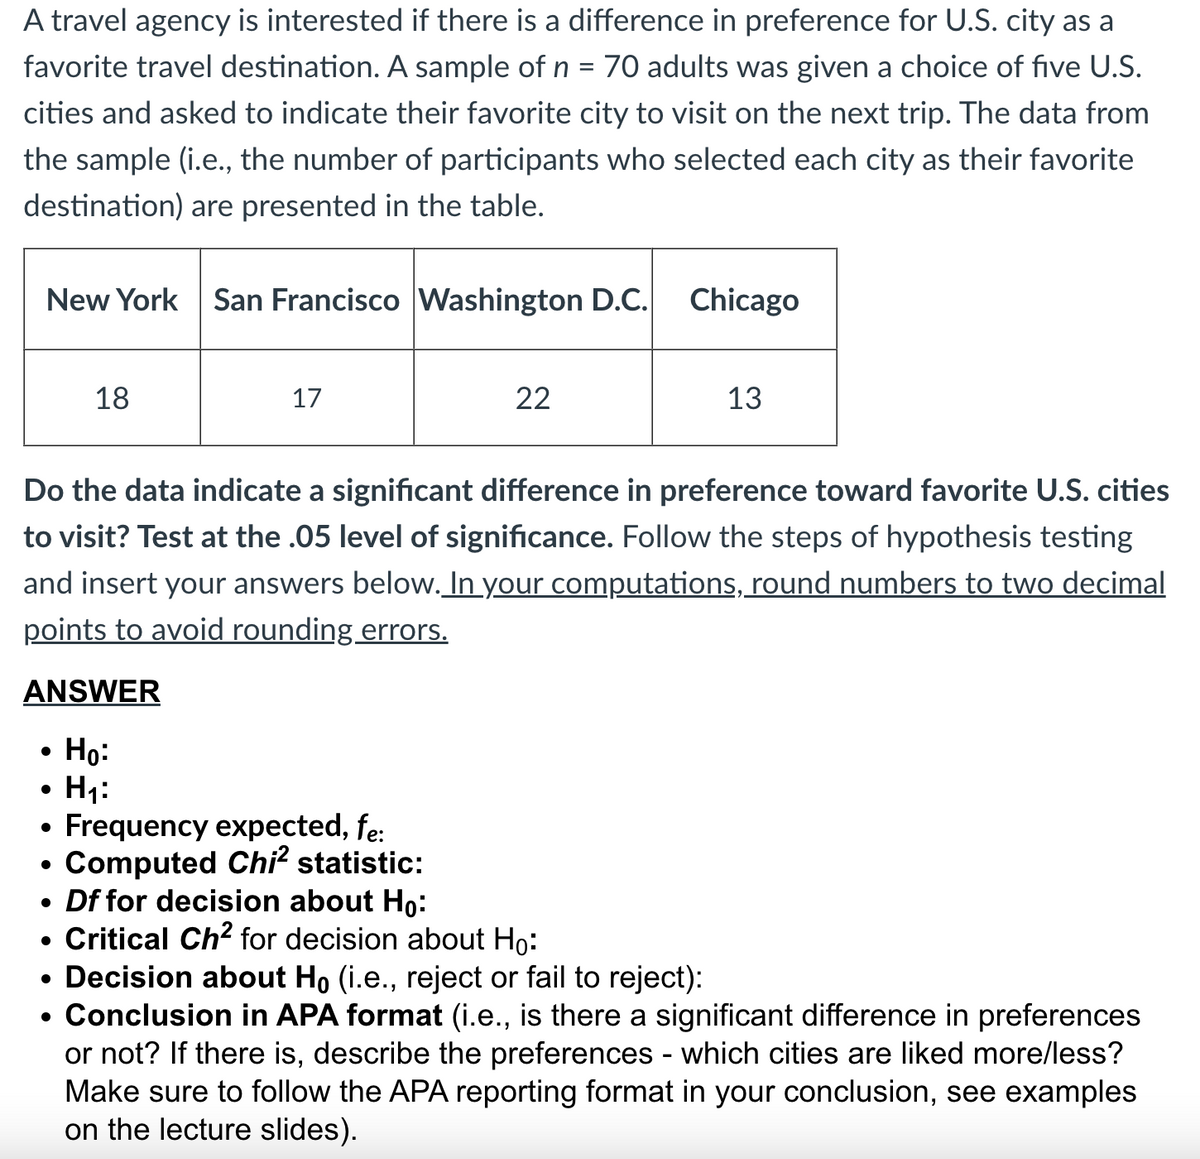 A travel agency is interested if there is a difference in preference for U.S. city as a
favorite travel destination. A sample of n = 70 adults was given a choice of five U.S.
cities and asked to indicate their favorite city to visit on the next trip. The data from
the sample (i.e., the number of participants who selected each city as their favorite
destination) are presented in the table.
New York
ANSWER
Ho:
H₁:
●
18
●
San Francisco Washington D.C.
●
17
Do the data indicate a significant difference in preference toward favorite U.S. cities
to visit? Test at the .05 level of significance. Follow the steps of hypothesis testing
and insert your answers below. In your computations, round numbers to two decimal
points to avoid rounding errors.
• Frequency expected, fe:
●
Computed Chi² statistic:
22
Chicago
Df for decision about Ho:
Critical Ch² for decision about Ho:
13
• Decision about Ho (i.e., reject or fail to reject):
• Conclusion in APA format (i.e., is there a significant difference in preferences
or not? If there is, describe the preferences - which cities are liked more/less?
Make sure to follow the APA reporting format in your conclusion, see examples
on the lecture slides).